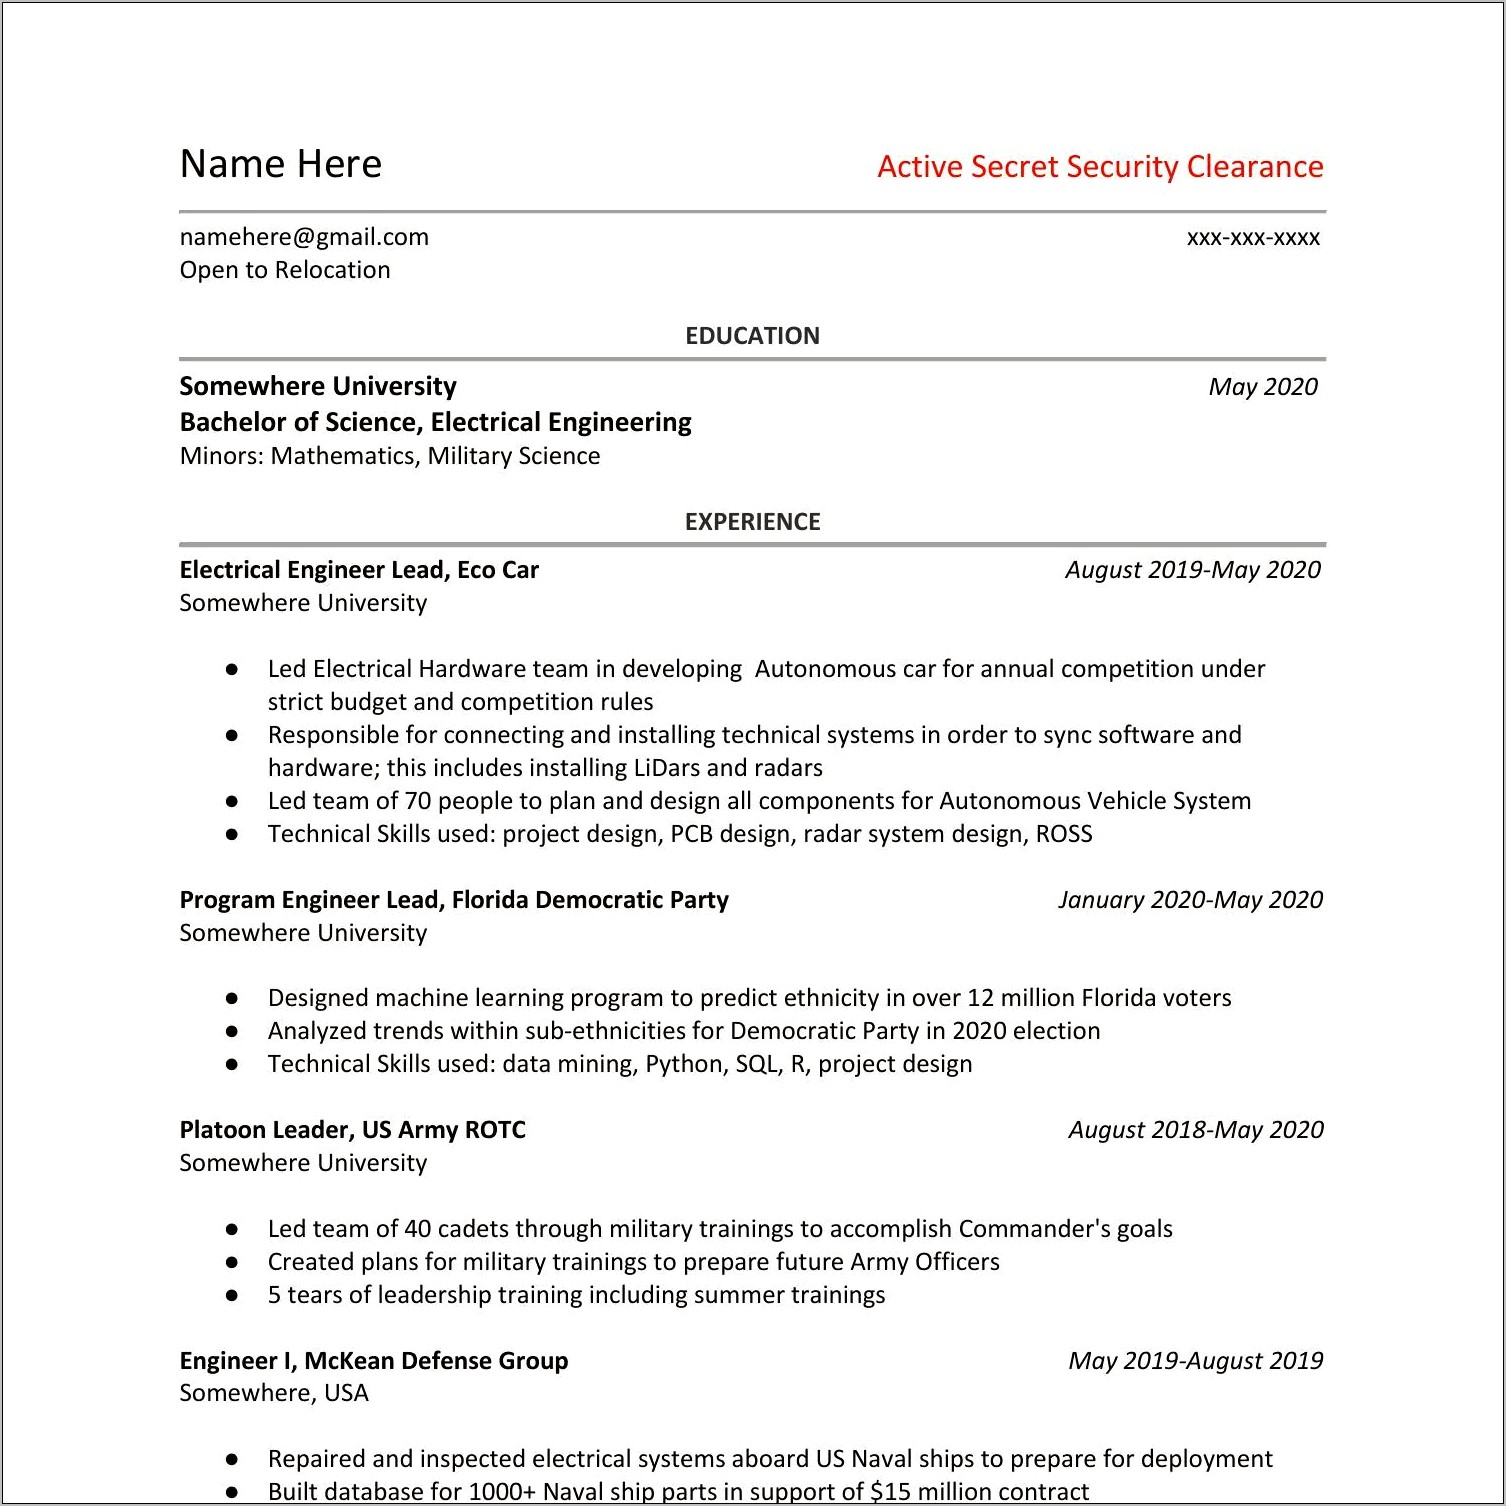 Resume Where To Put Security Clearance